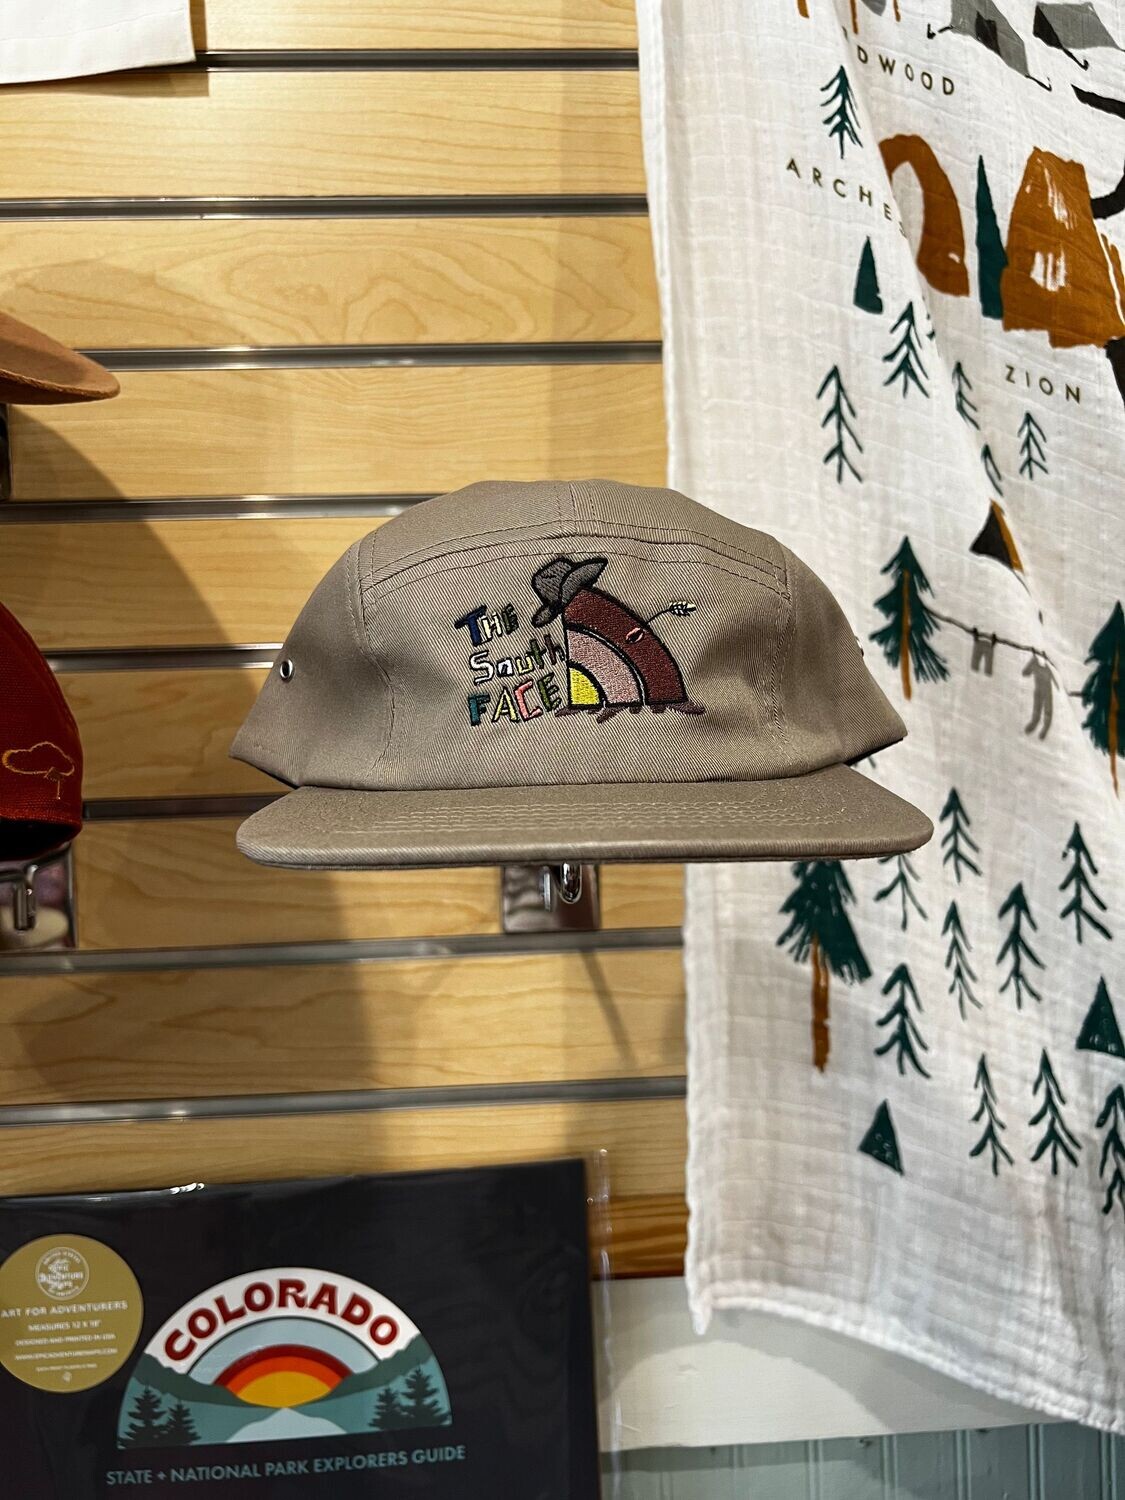 The South Face Hat